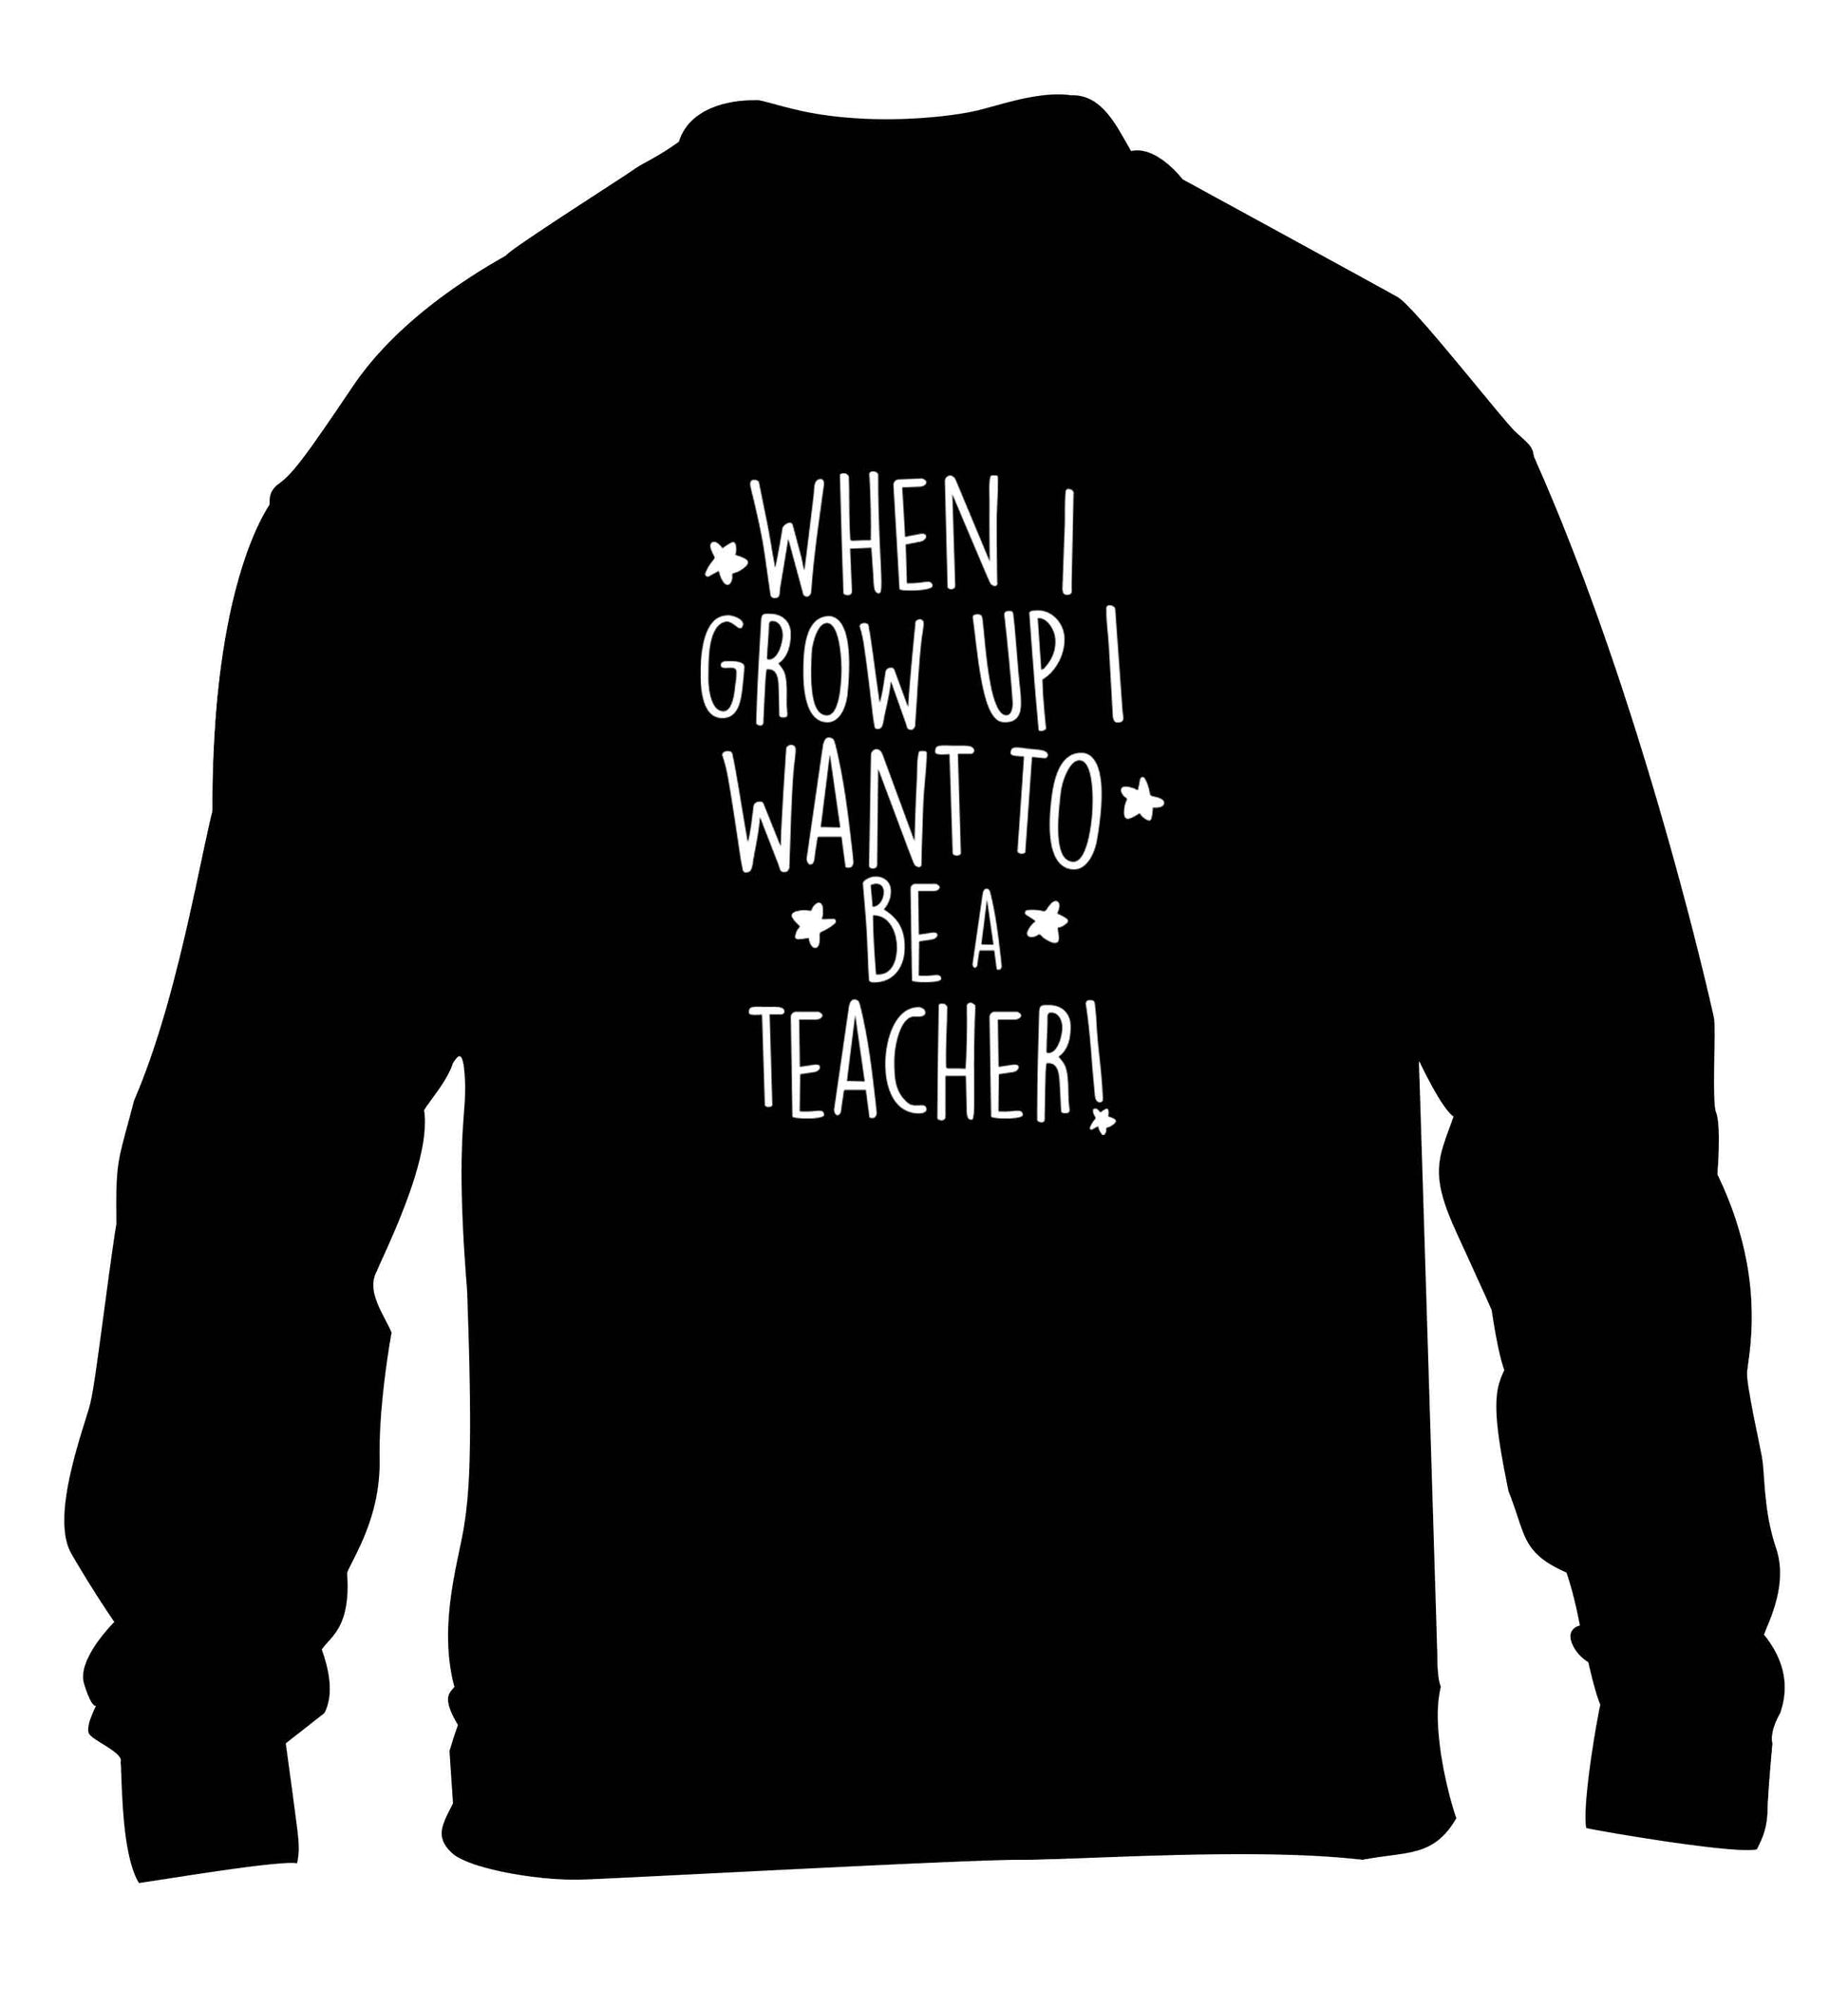 When I grow up I want to be a teacher children's black sweater 12-13 Years